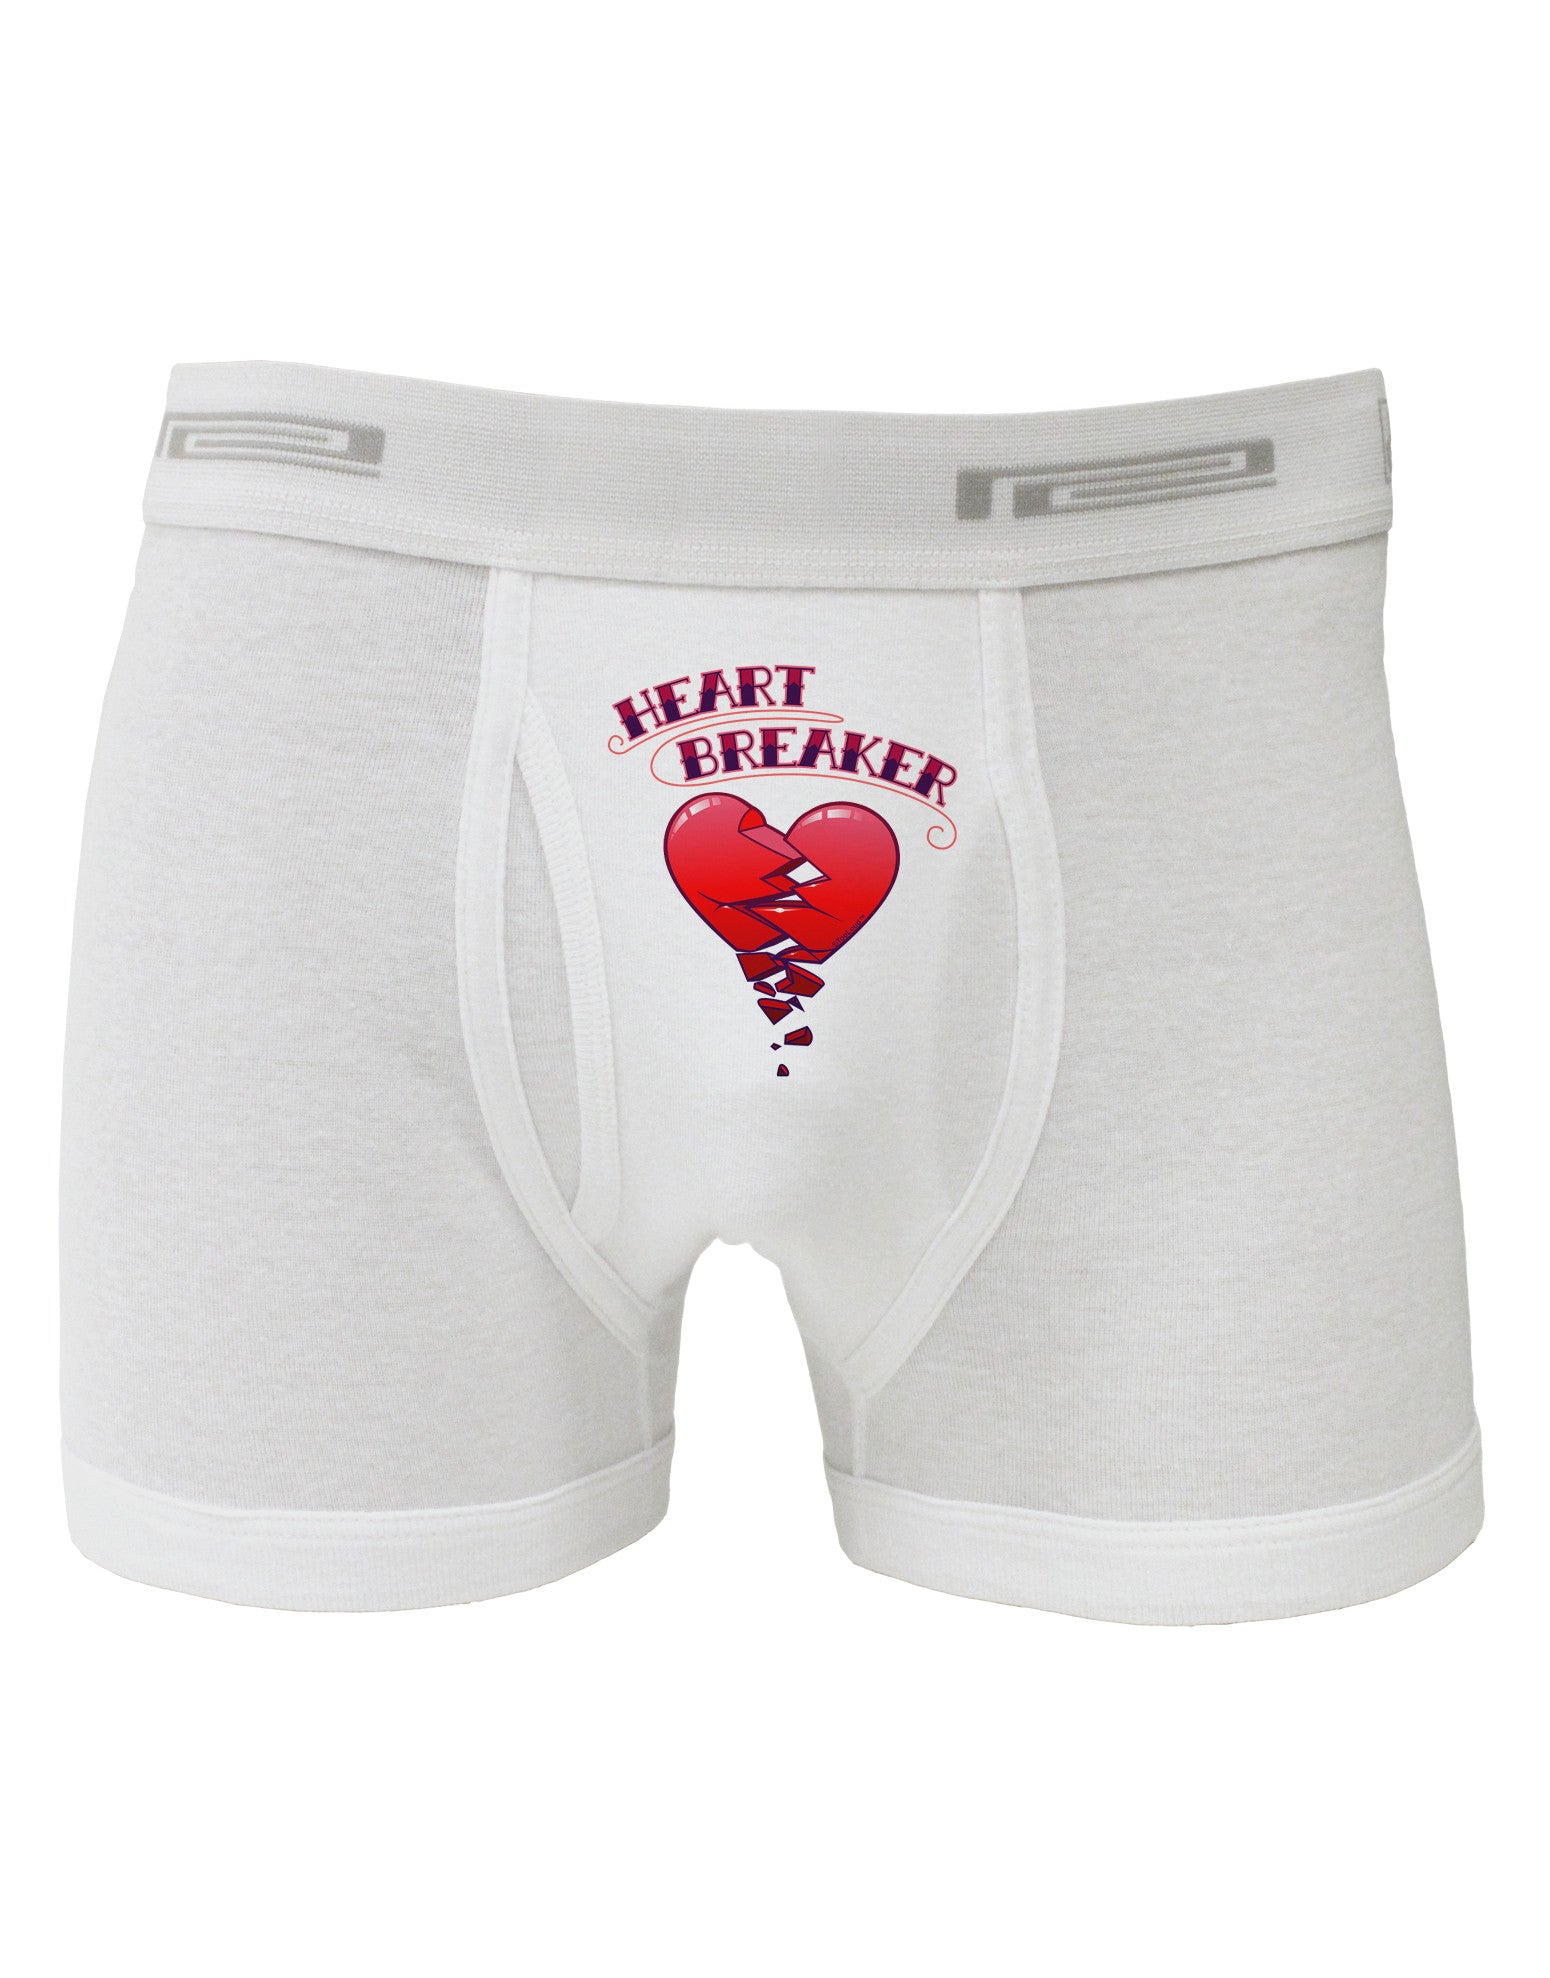 Custom Underwear Makes the Perfect Gift for Valentine's Day